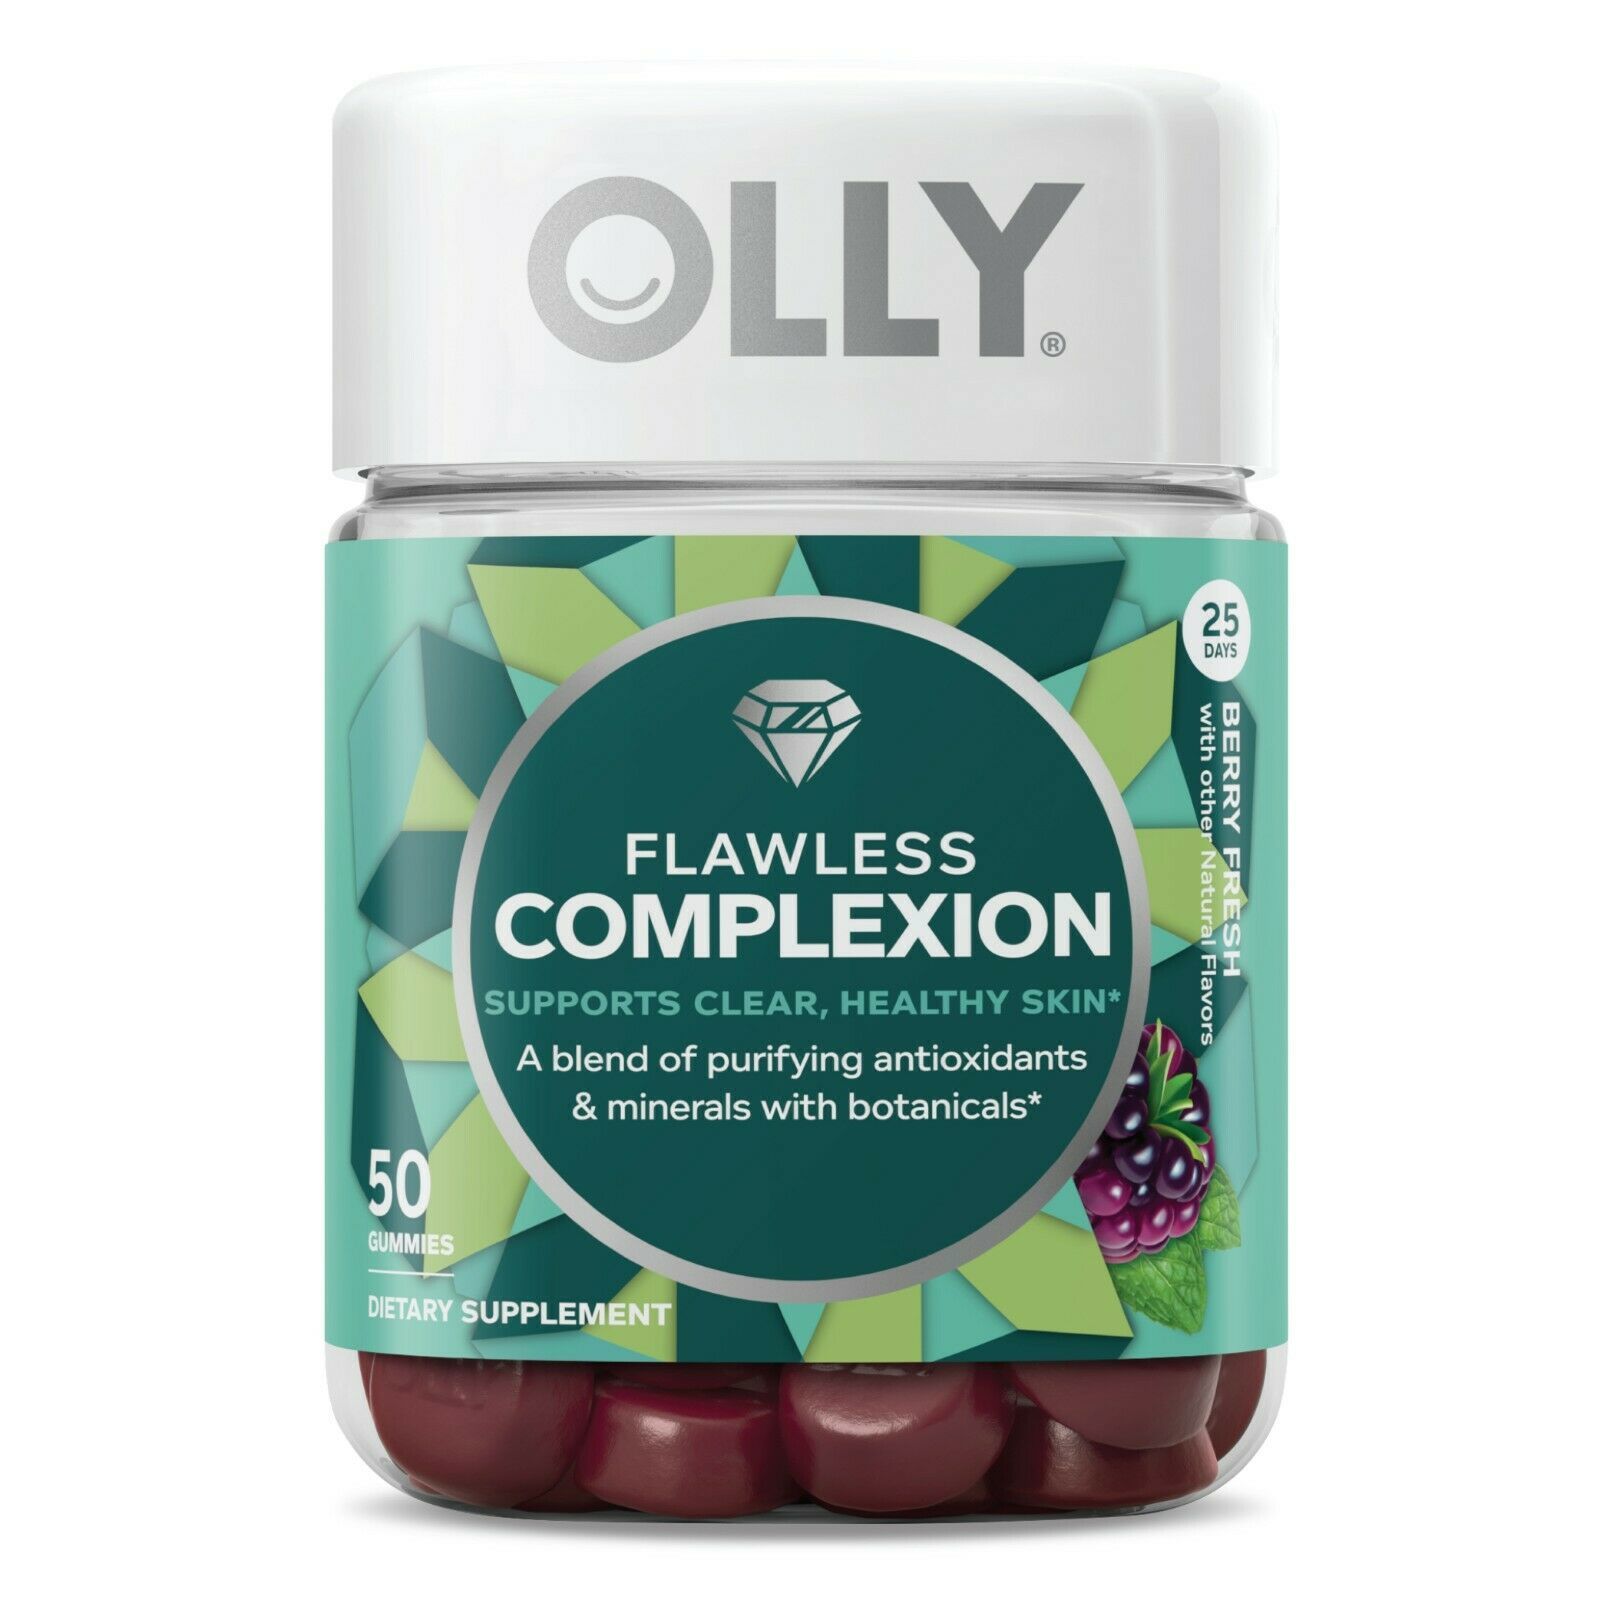 Olly Flawless Complexion Dietary Supplement Gummies - Berry Fresh - 50 CT. - $21.77